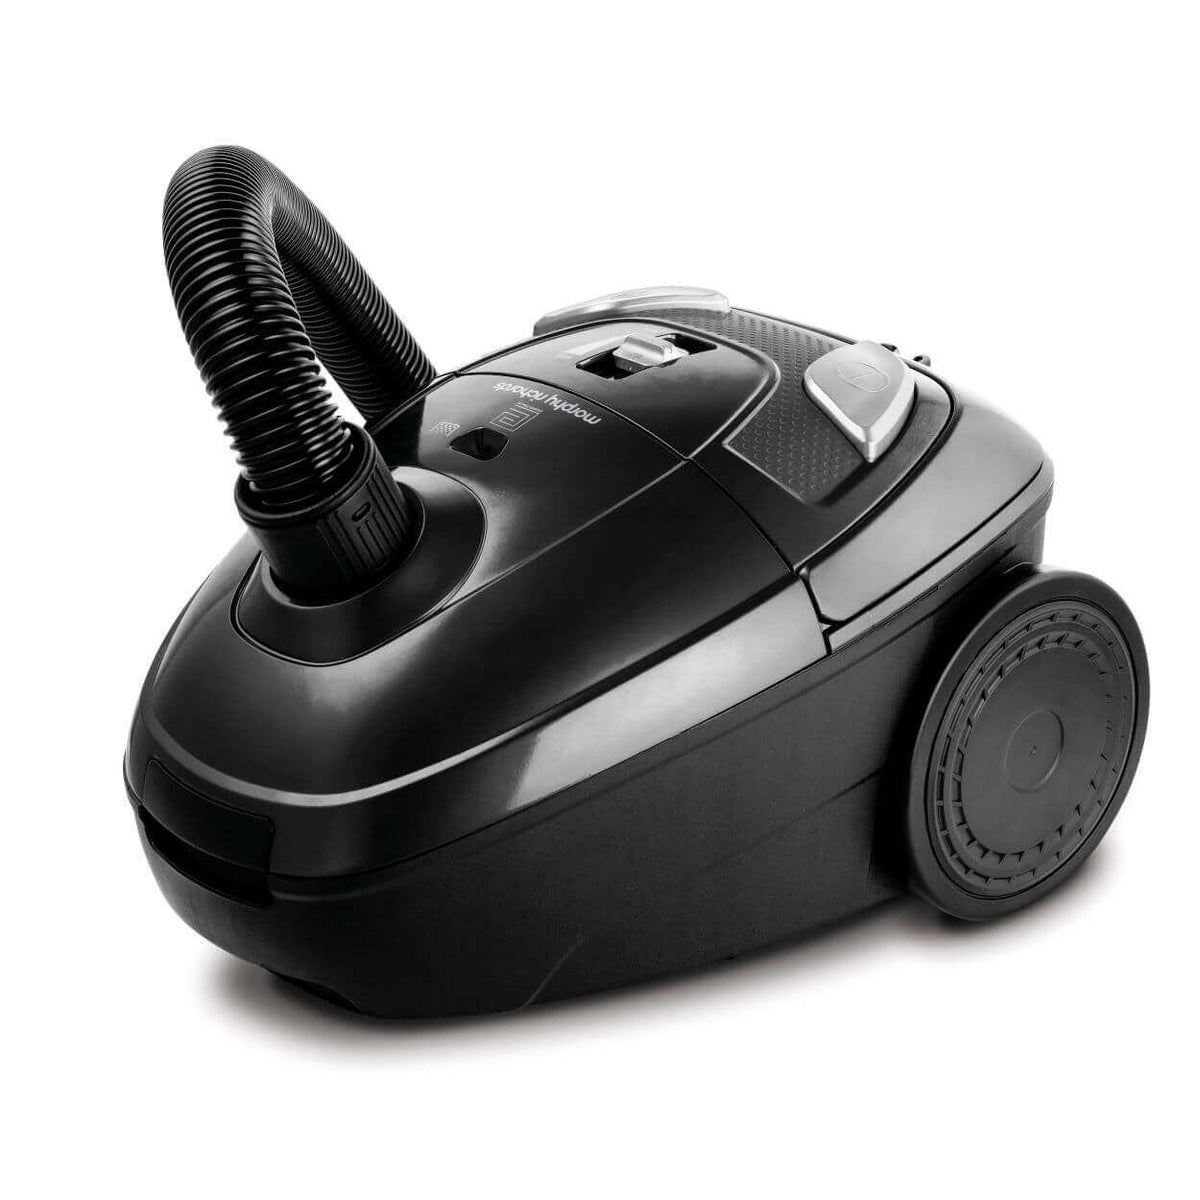 Morphy Richards 2L Bagged Vacuum Cleaner - Black | 980572 from Morphy Richards - DID Electrical